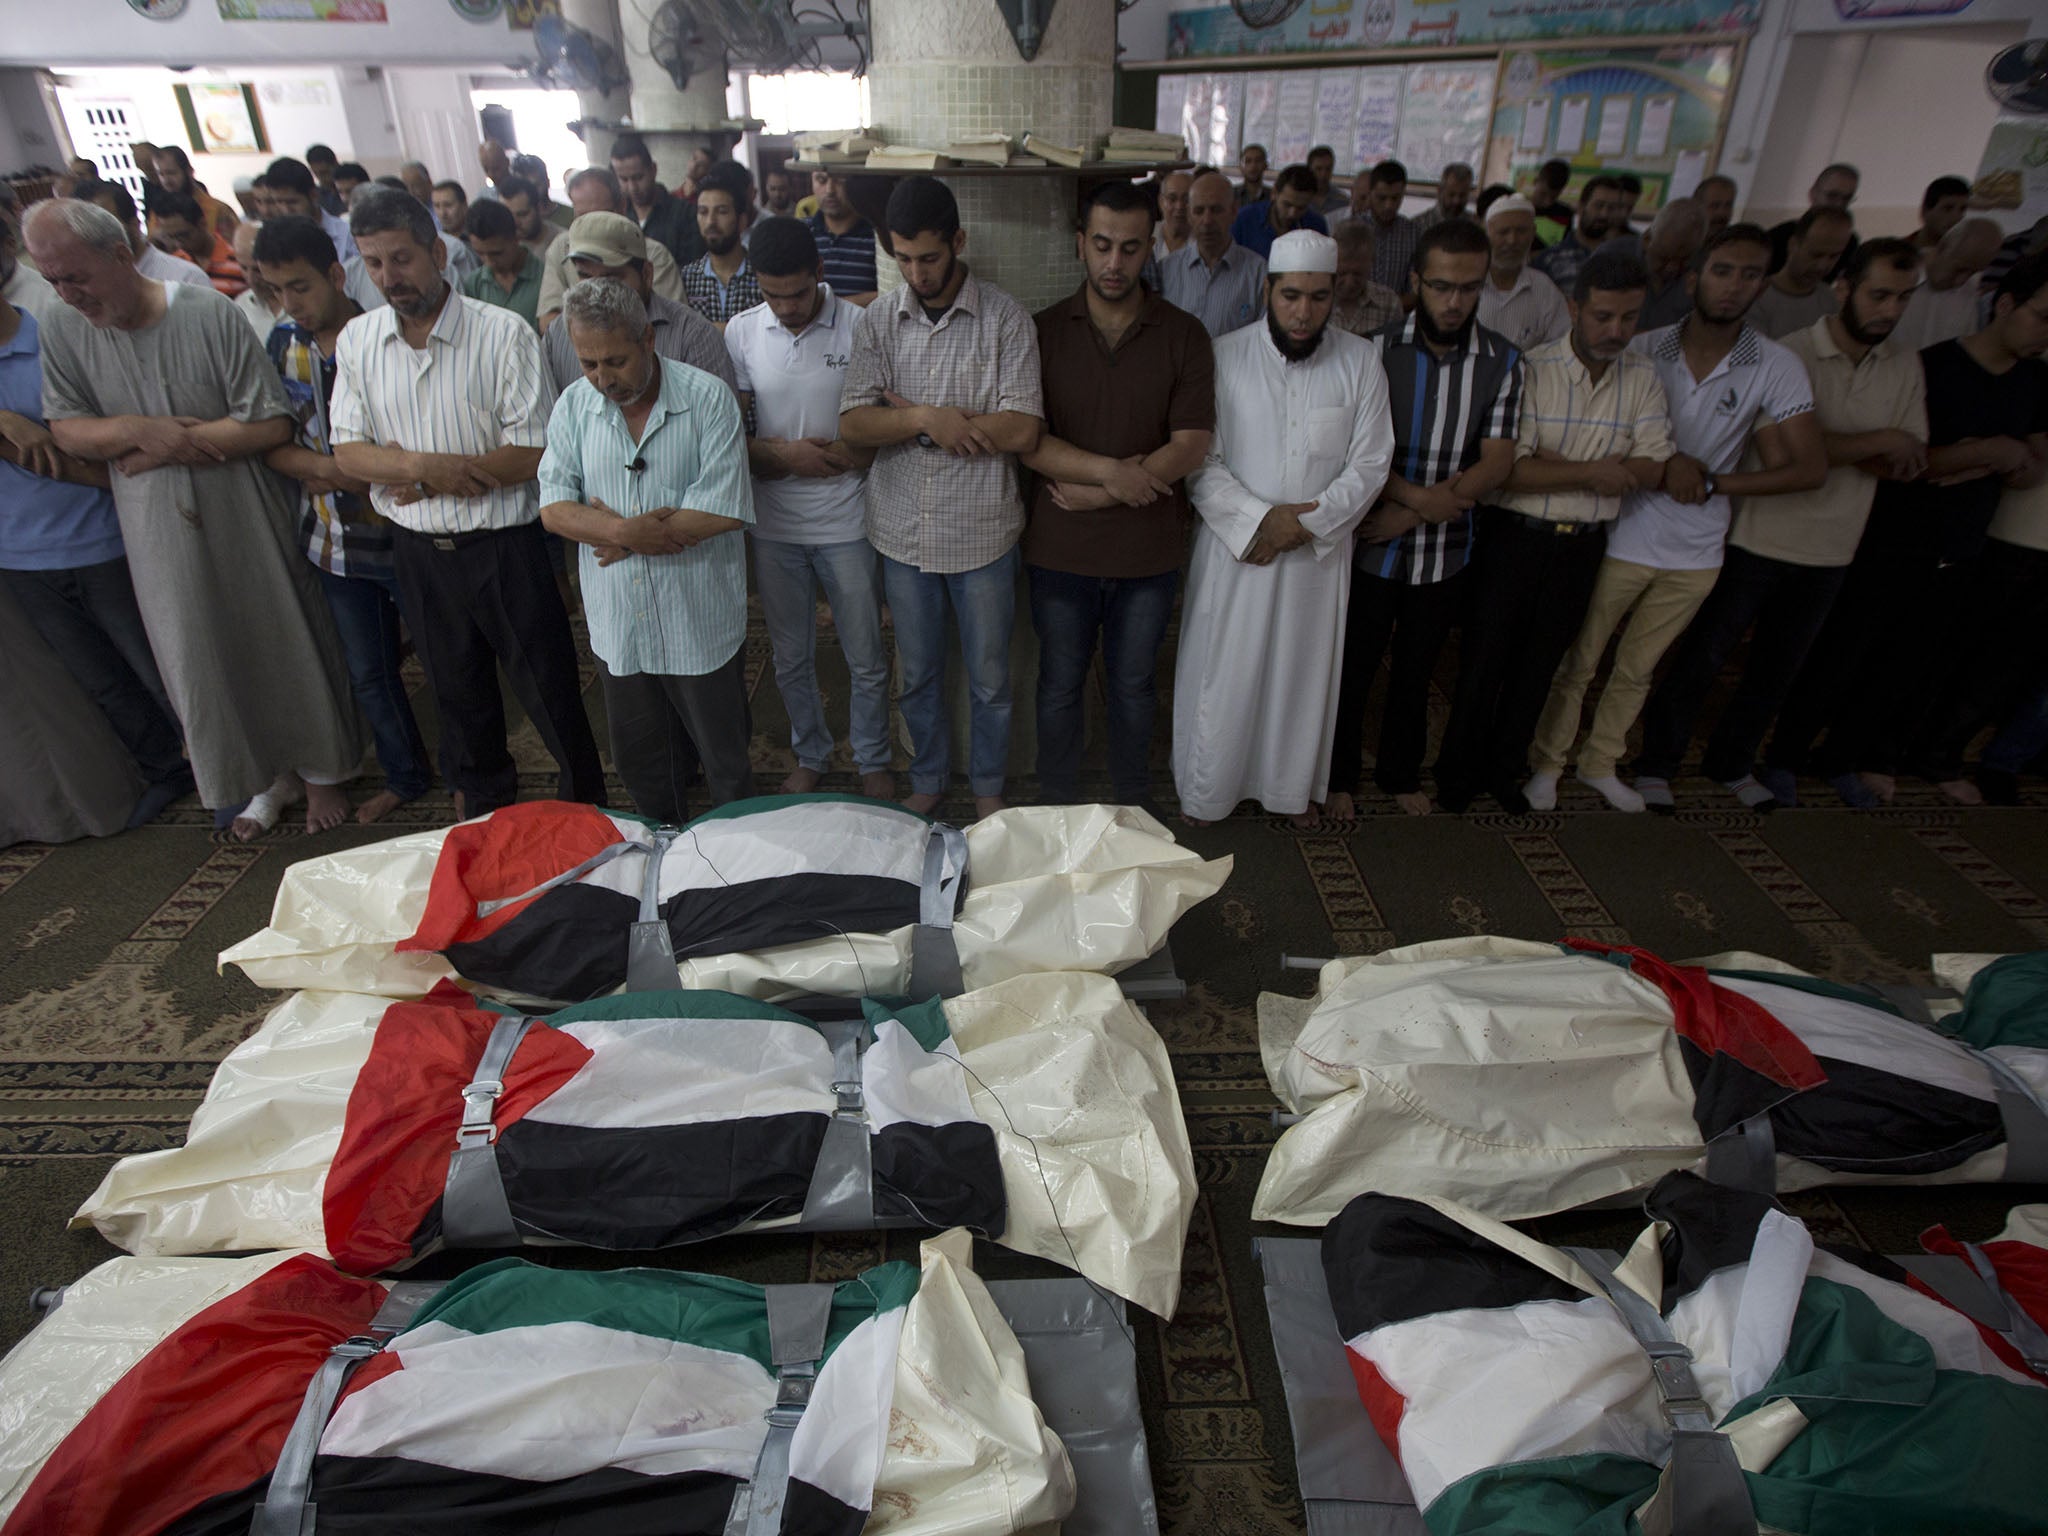 Palestinian mourners pray over five bodies, all from the Halaq family, during their funeral in the Jabalia refugee camp, in the Gaza Strip, on 21 July 2014